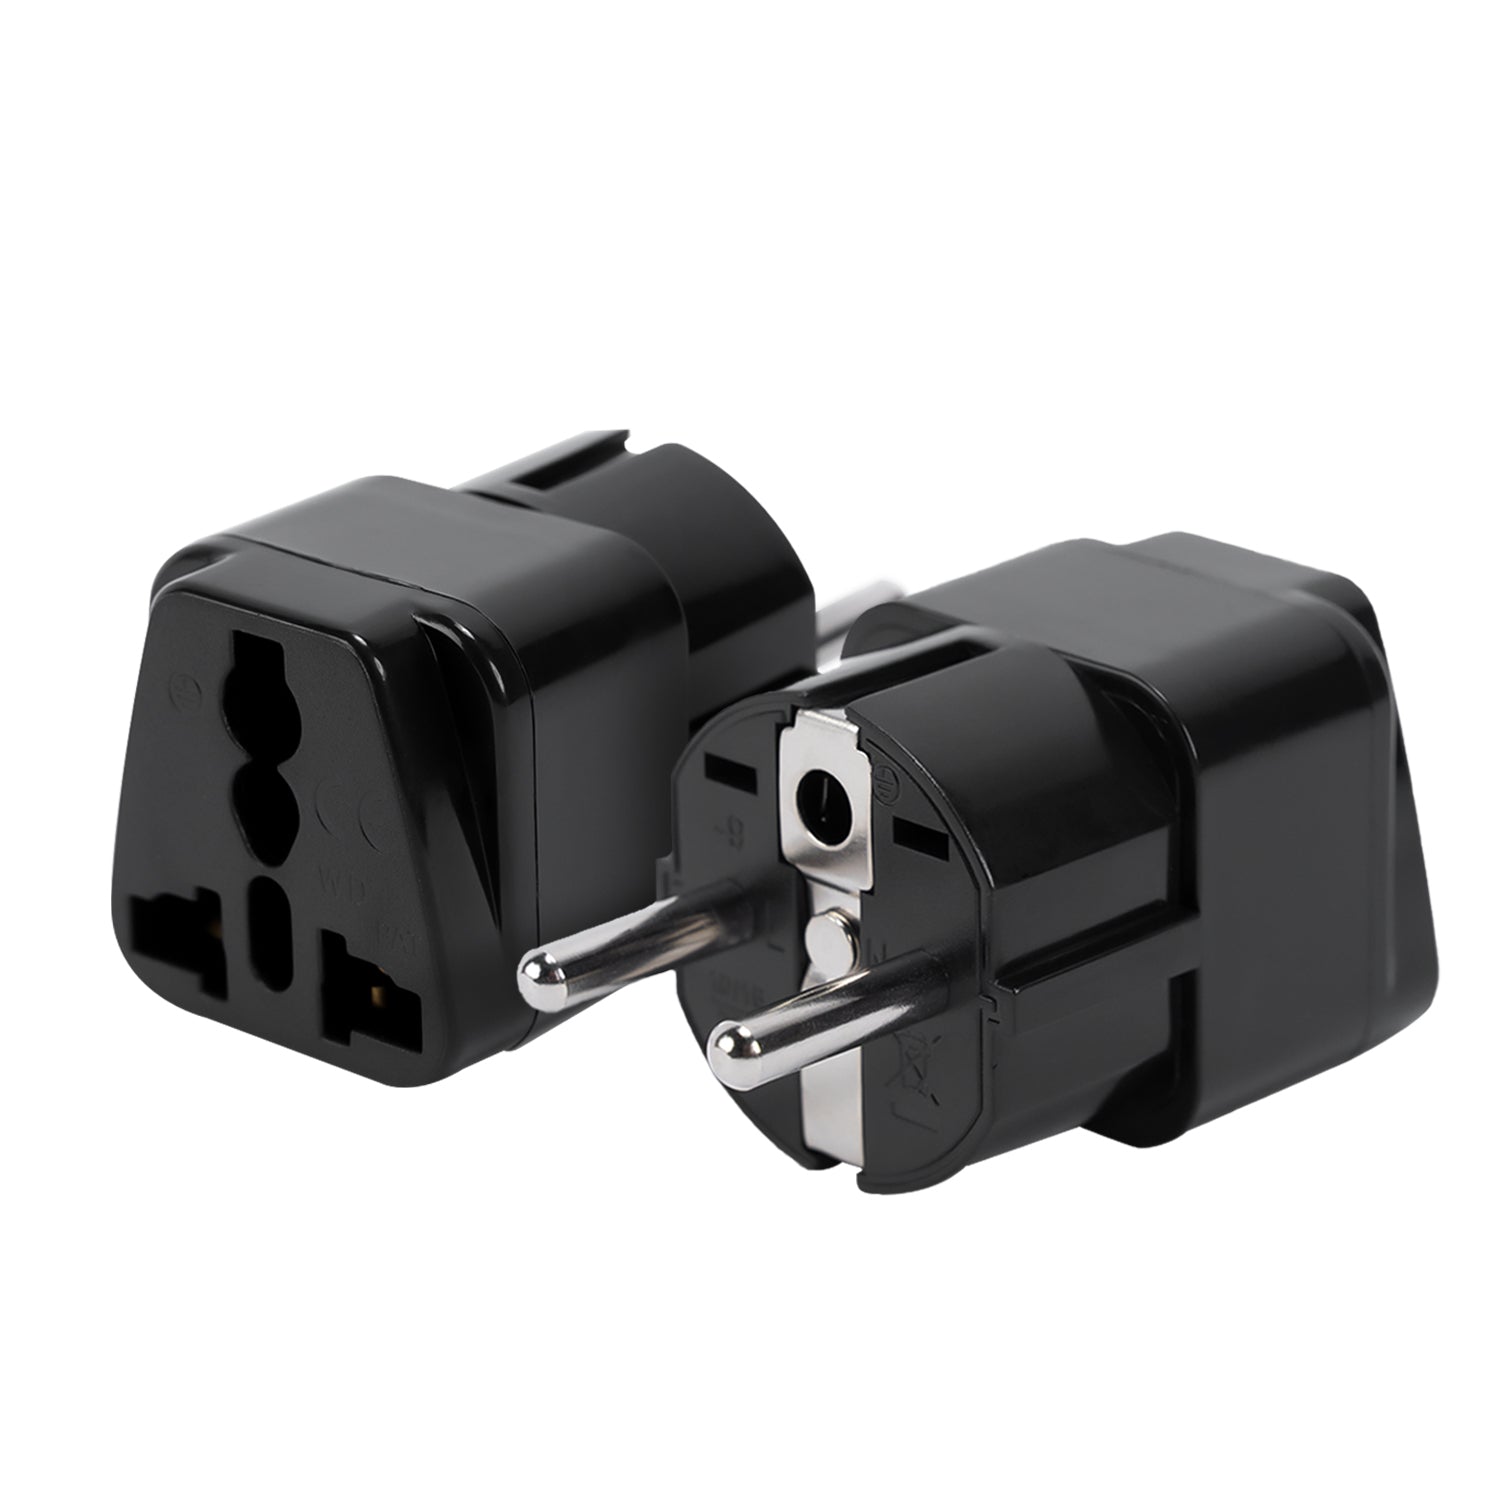 JOVS Black USA to Switzerland Adapter Plug for Secure Electrical Connectivity.